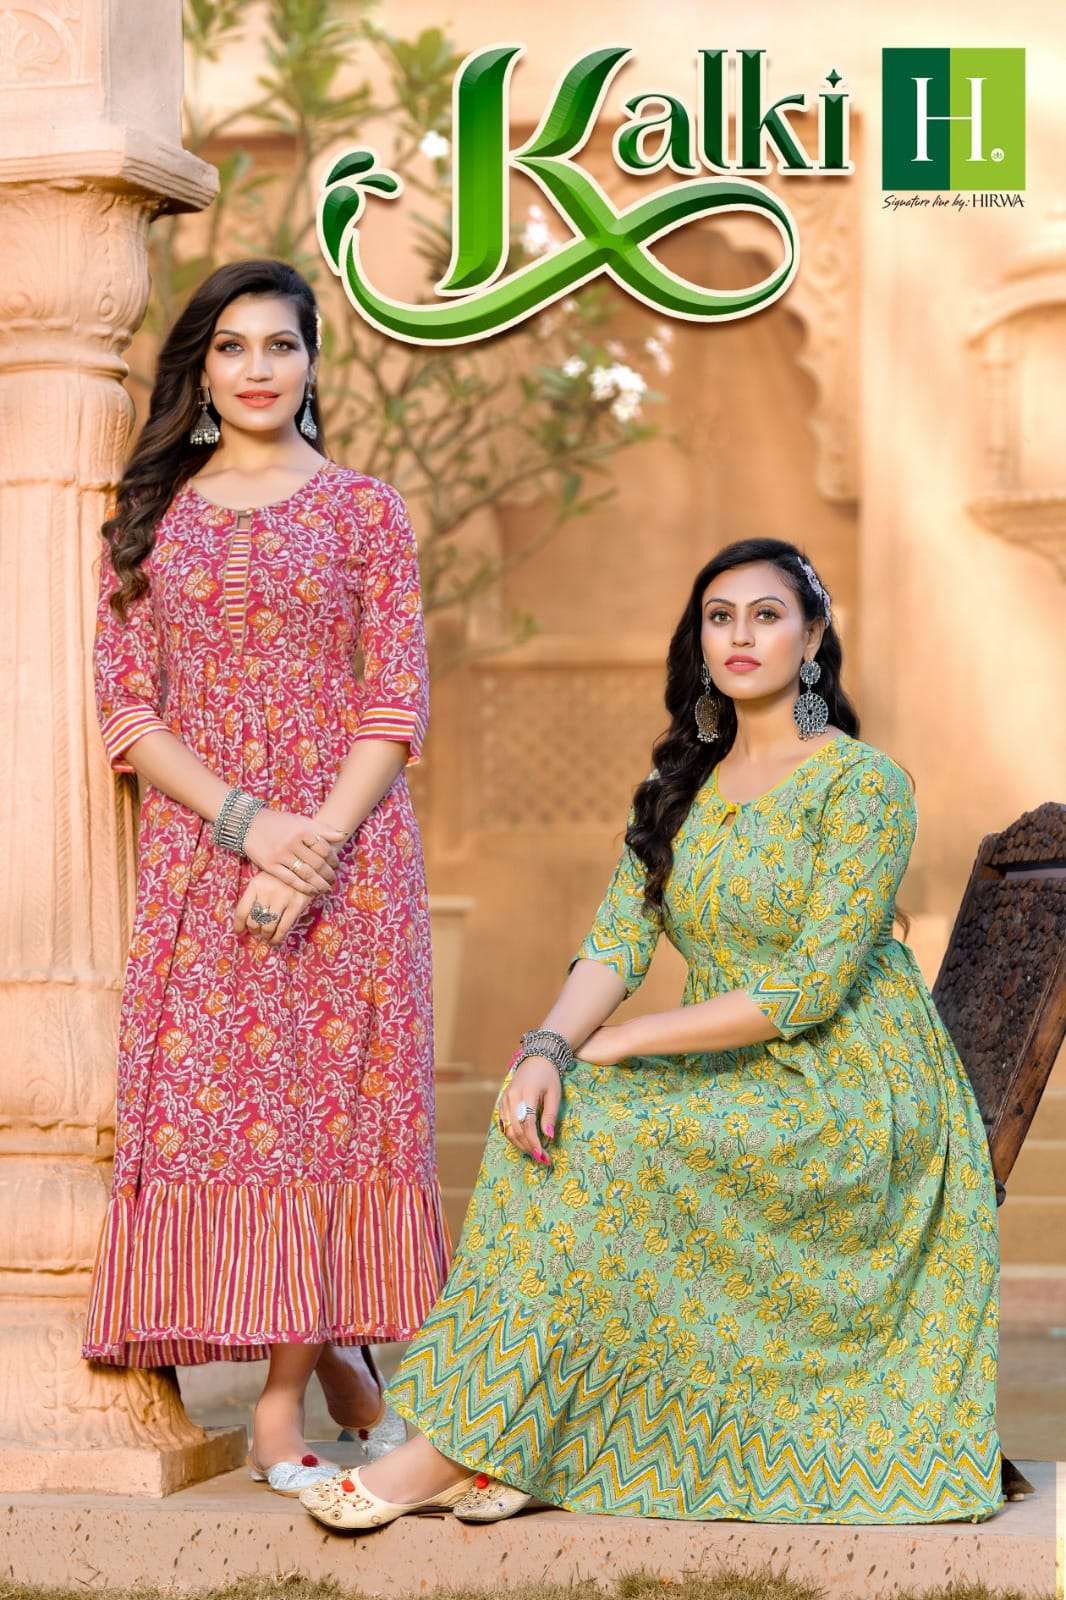 Kalki By Hirwa 101 To 108 Series Beautiful Stylish Fancy Colorful Casual Wear & Ethnic Wear Pure Cambric Cotton Gowns At Wholesale Price